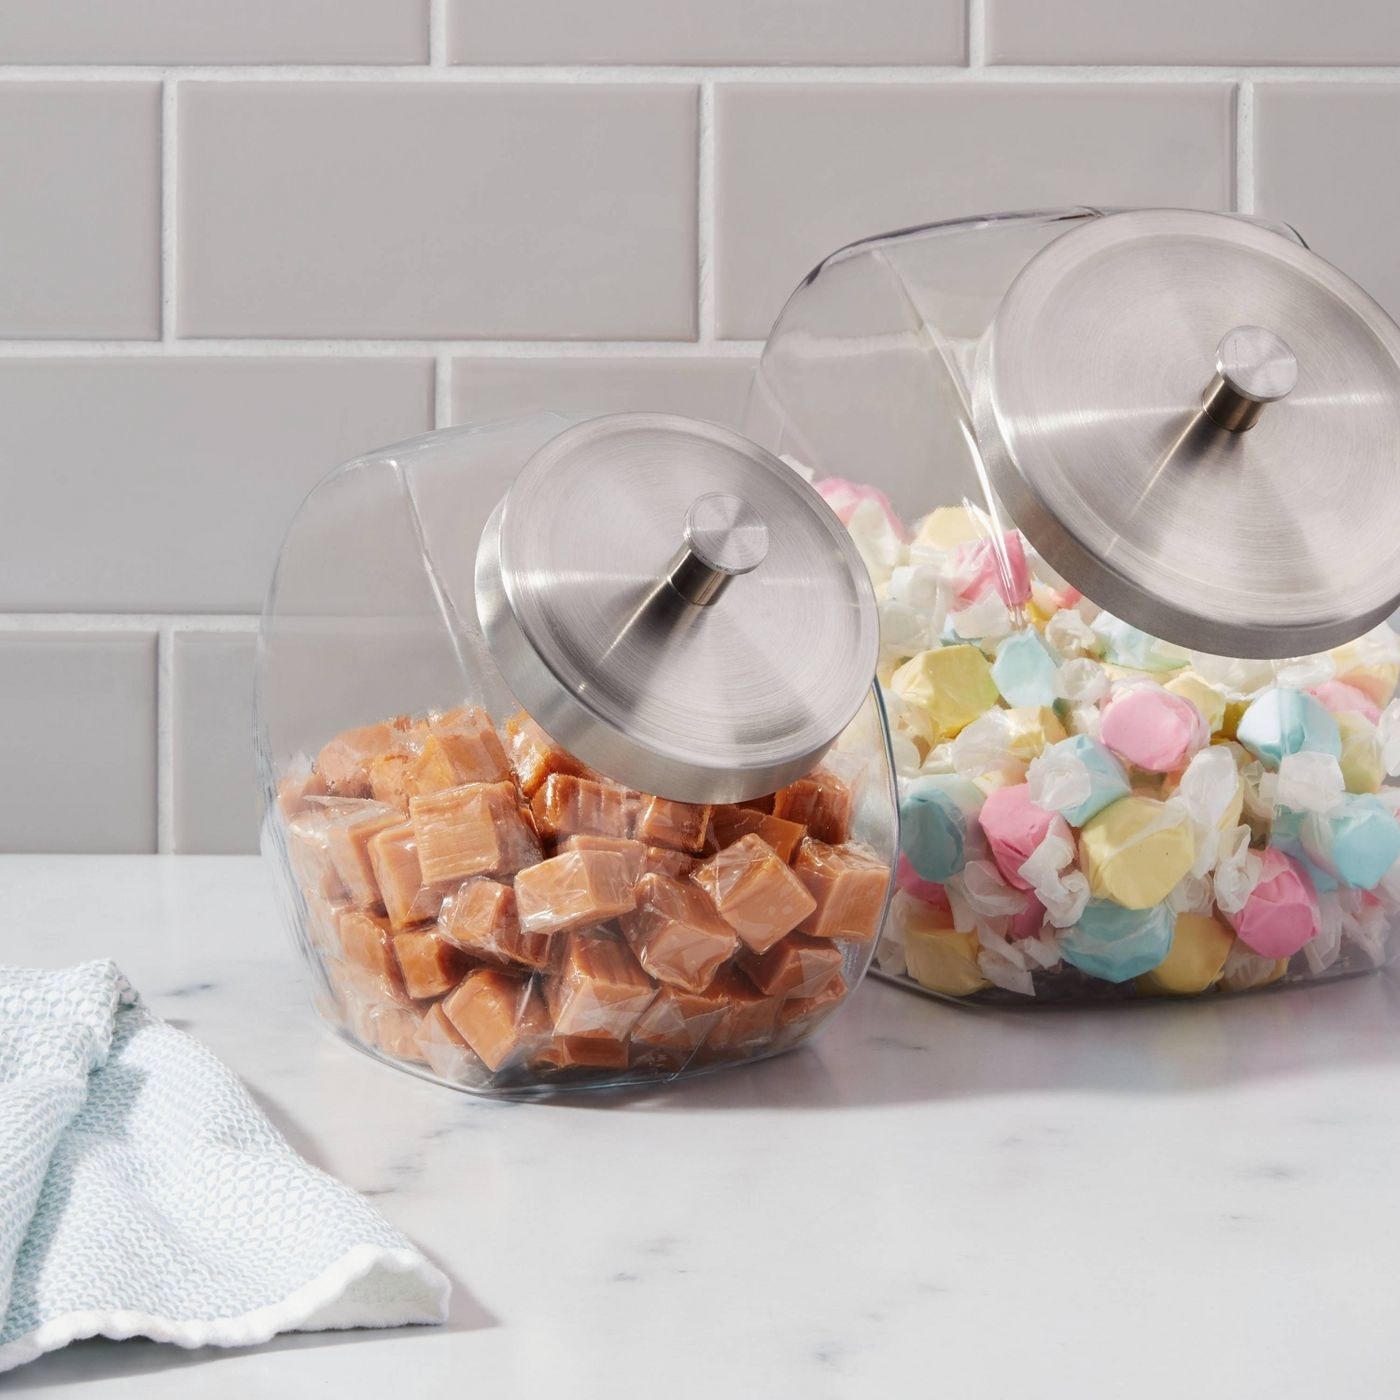 the two jars on a counter, both filled with candy